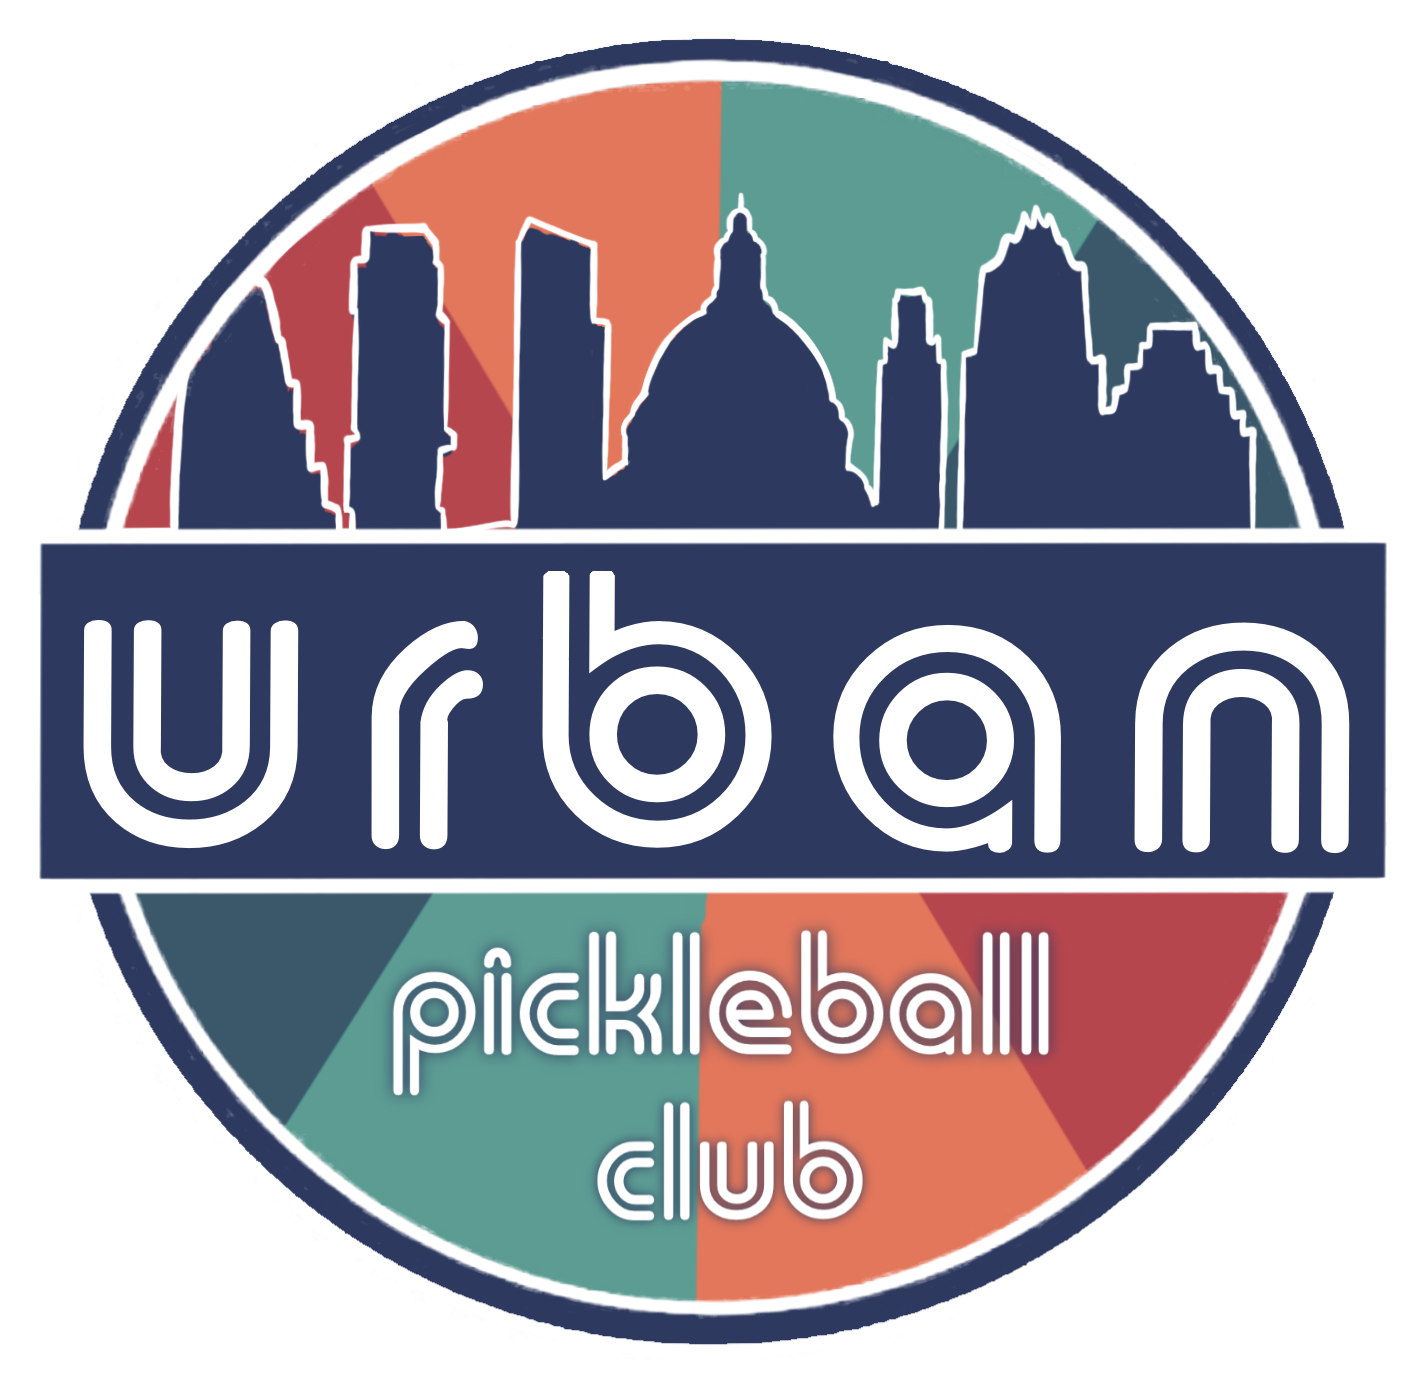 Image 6 of 7 of  Urban Pickleball Club  court